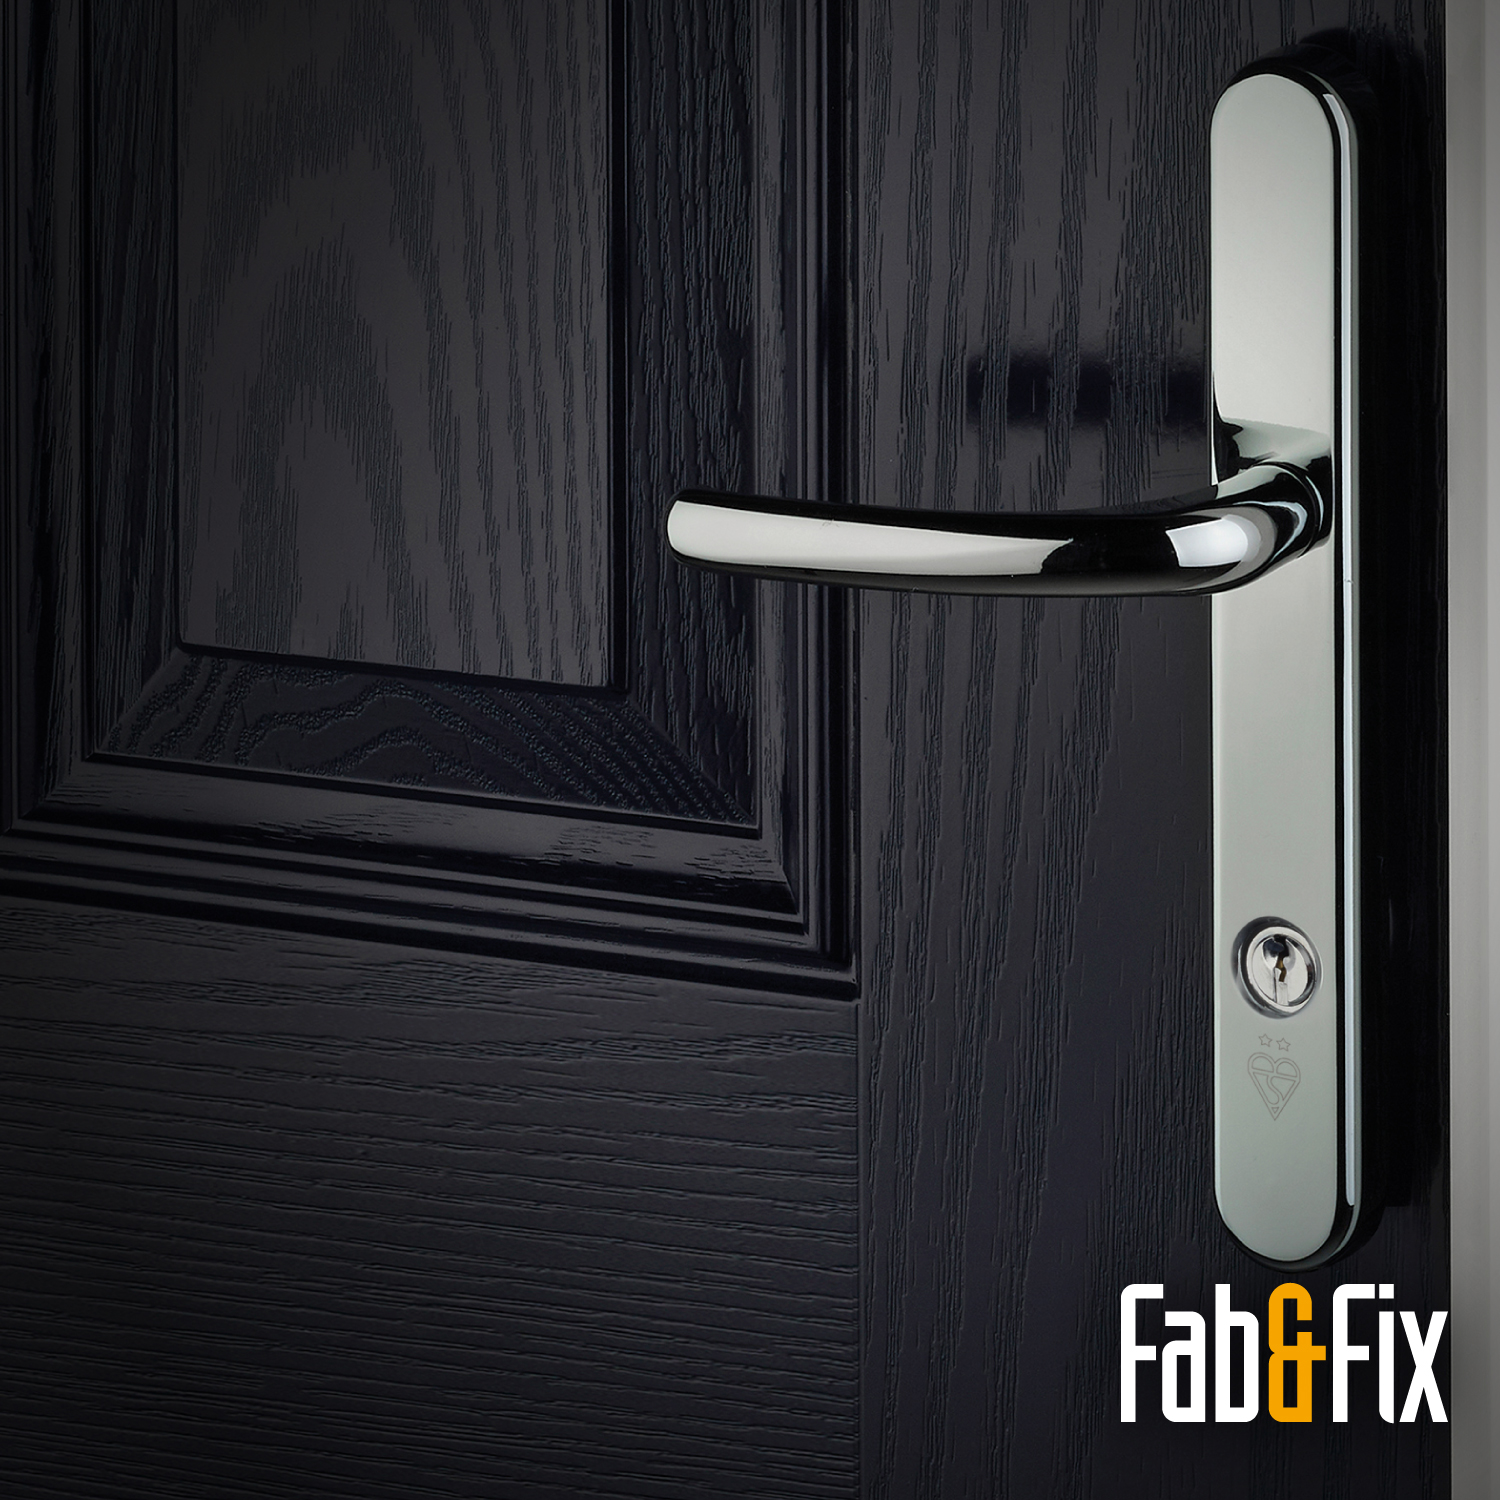 Security door handles have increased in popularity with the rise of cylinder bumping and snapping. The need to protect the cylinder is important.